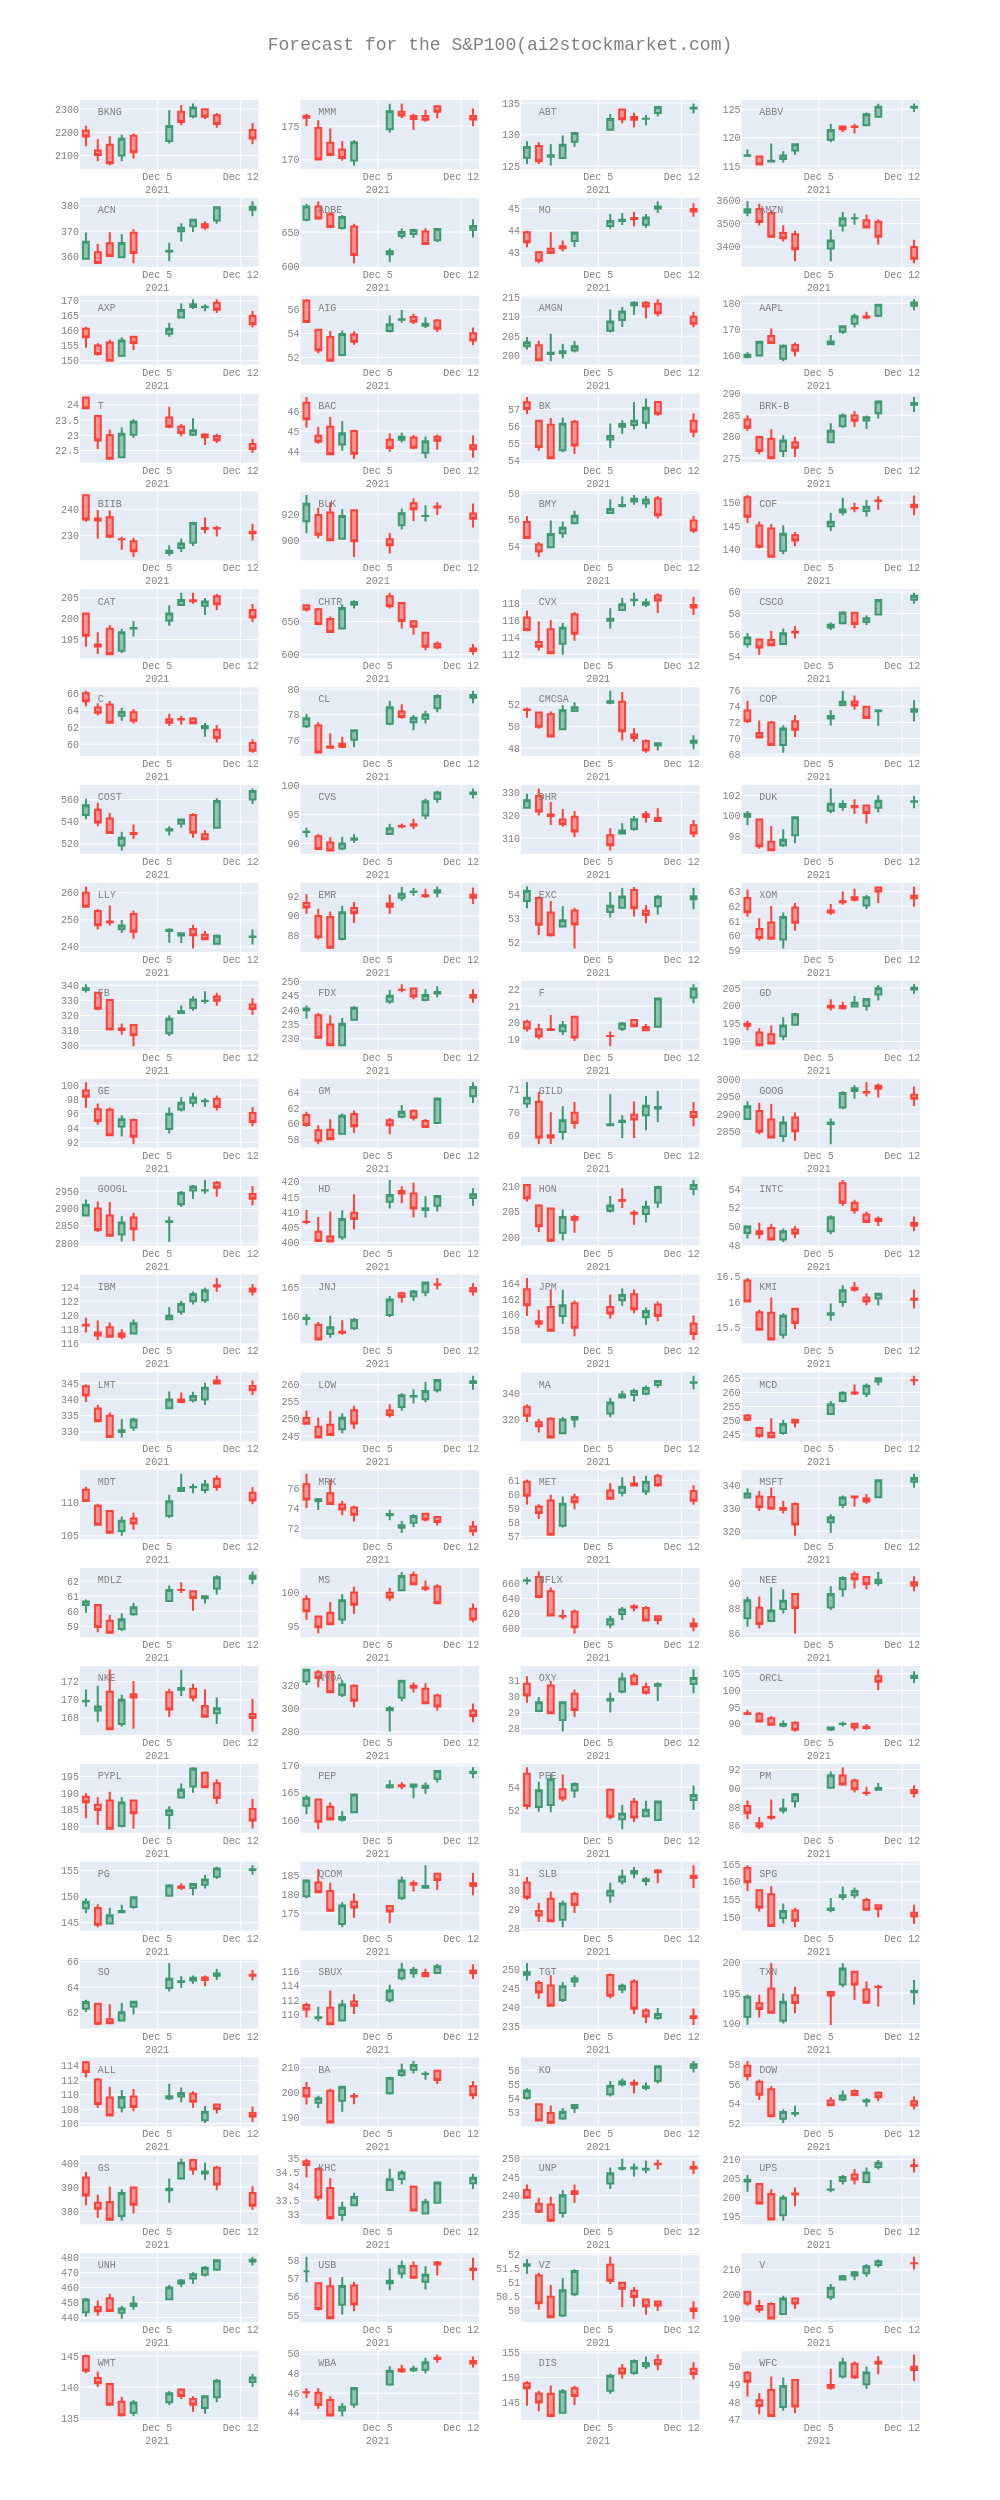 Forecast for the S&P100(ai2stockmarket.com) | candlestick made by Ziwang | plotly